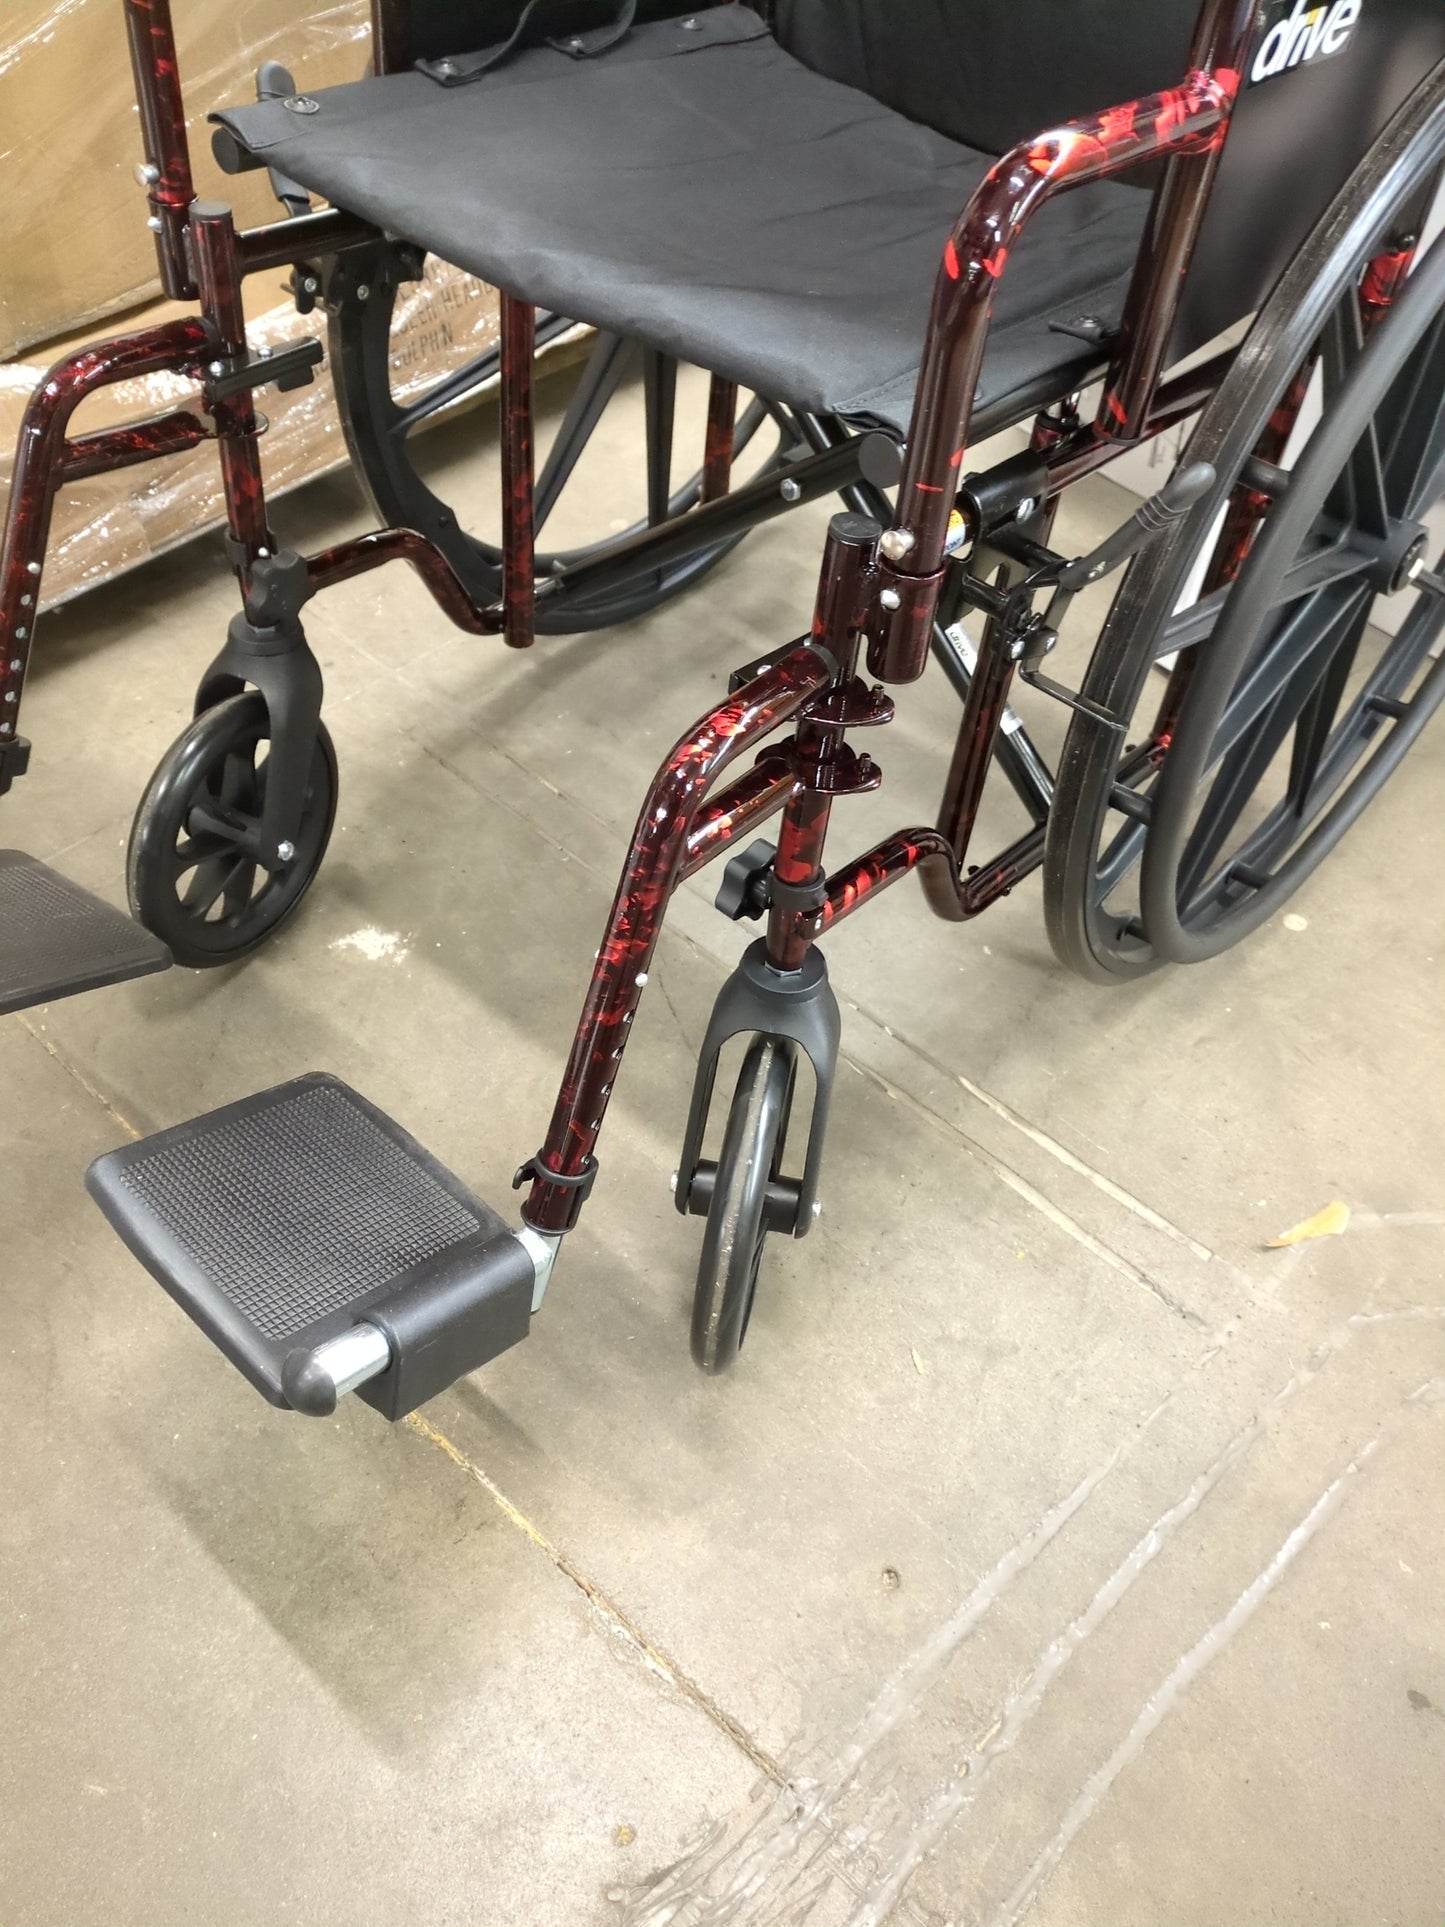 Drive Medical RTLREB18DDA-SF Rebel Lightweight Wheelchair with Swing-Away Footrest, Red - Retail $155